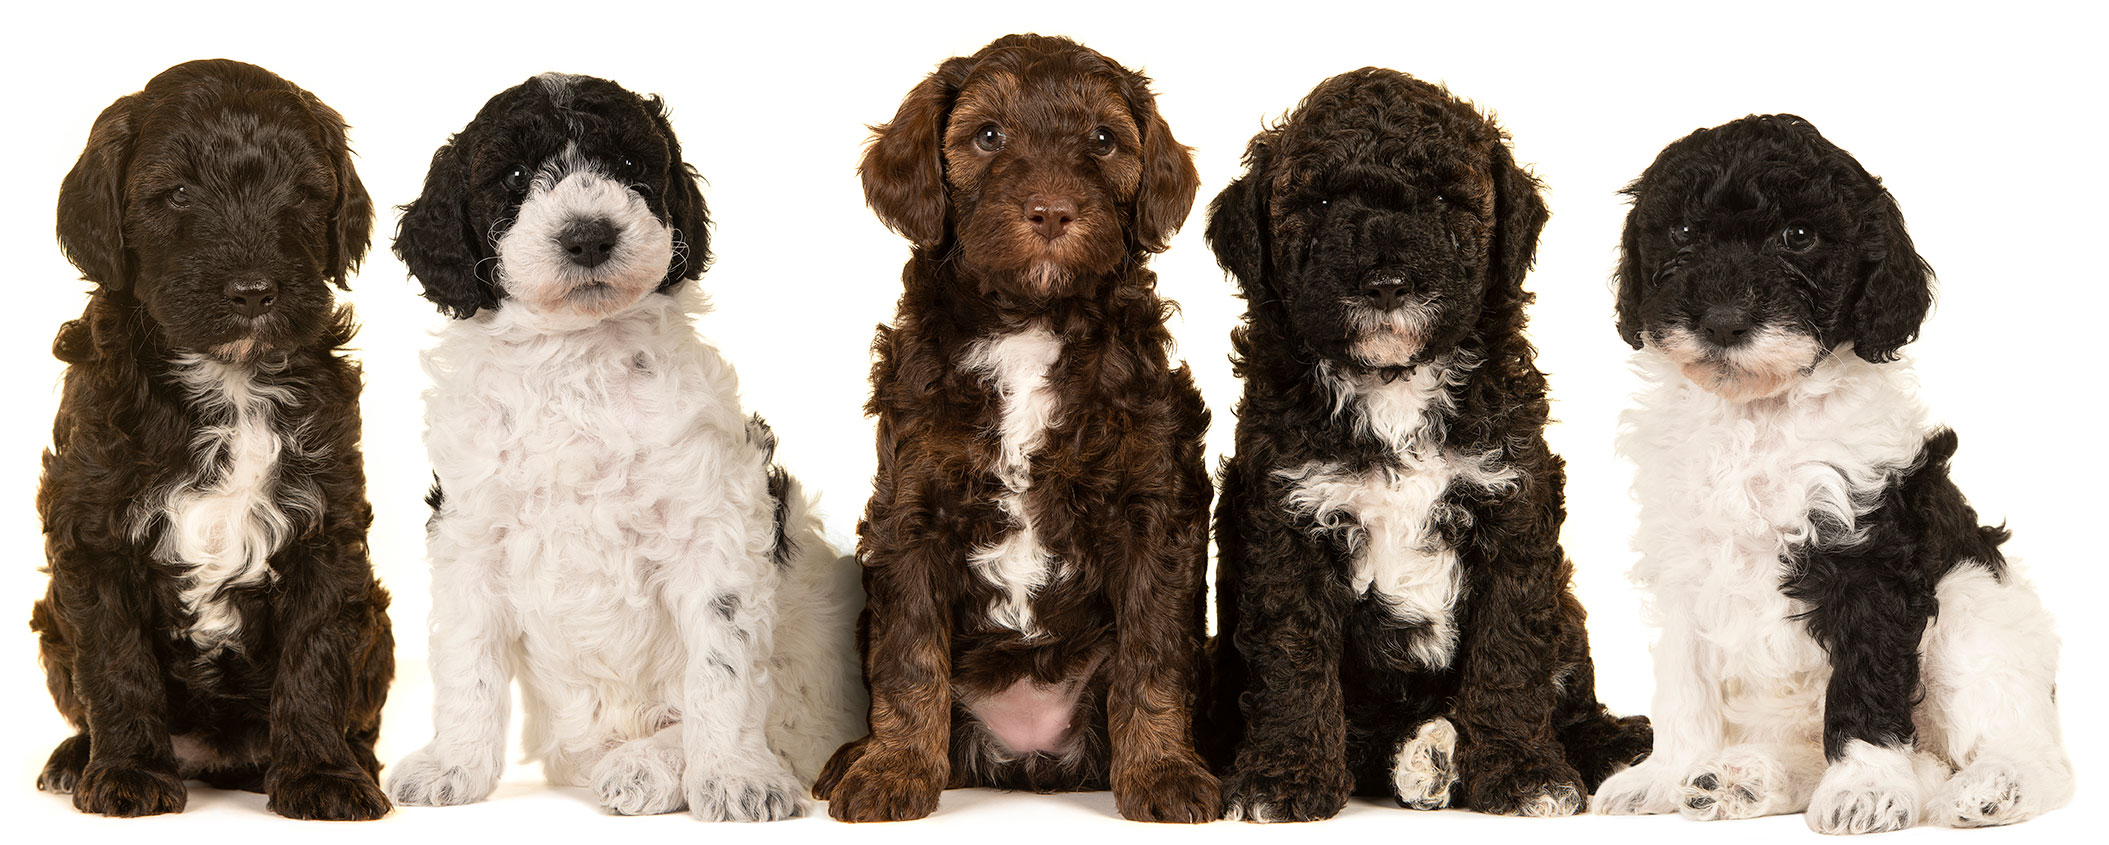 Five goldendoodle puppies standing side-by-side. Mixed colour of chocolate brown and white.